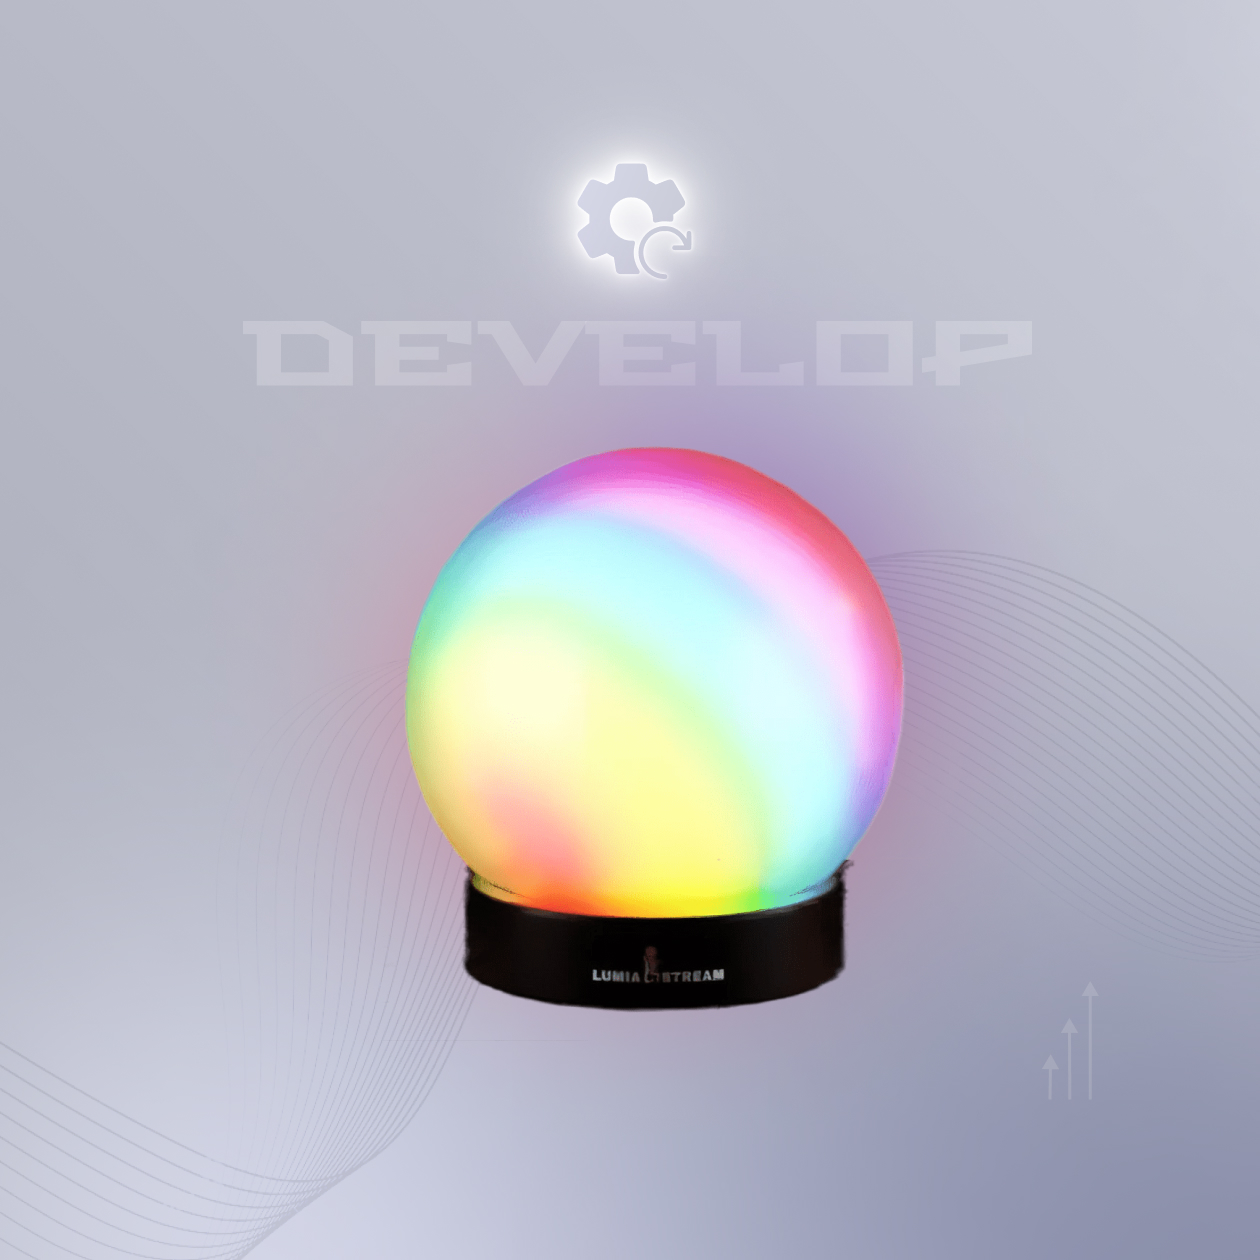 With help of mechanical engineering, 3D printing and electrical engineering the LED globe was made. Development of 2022.